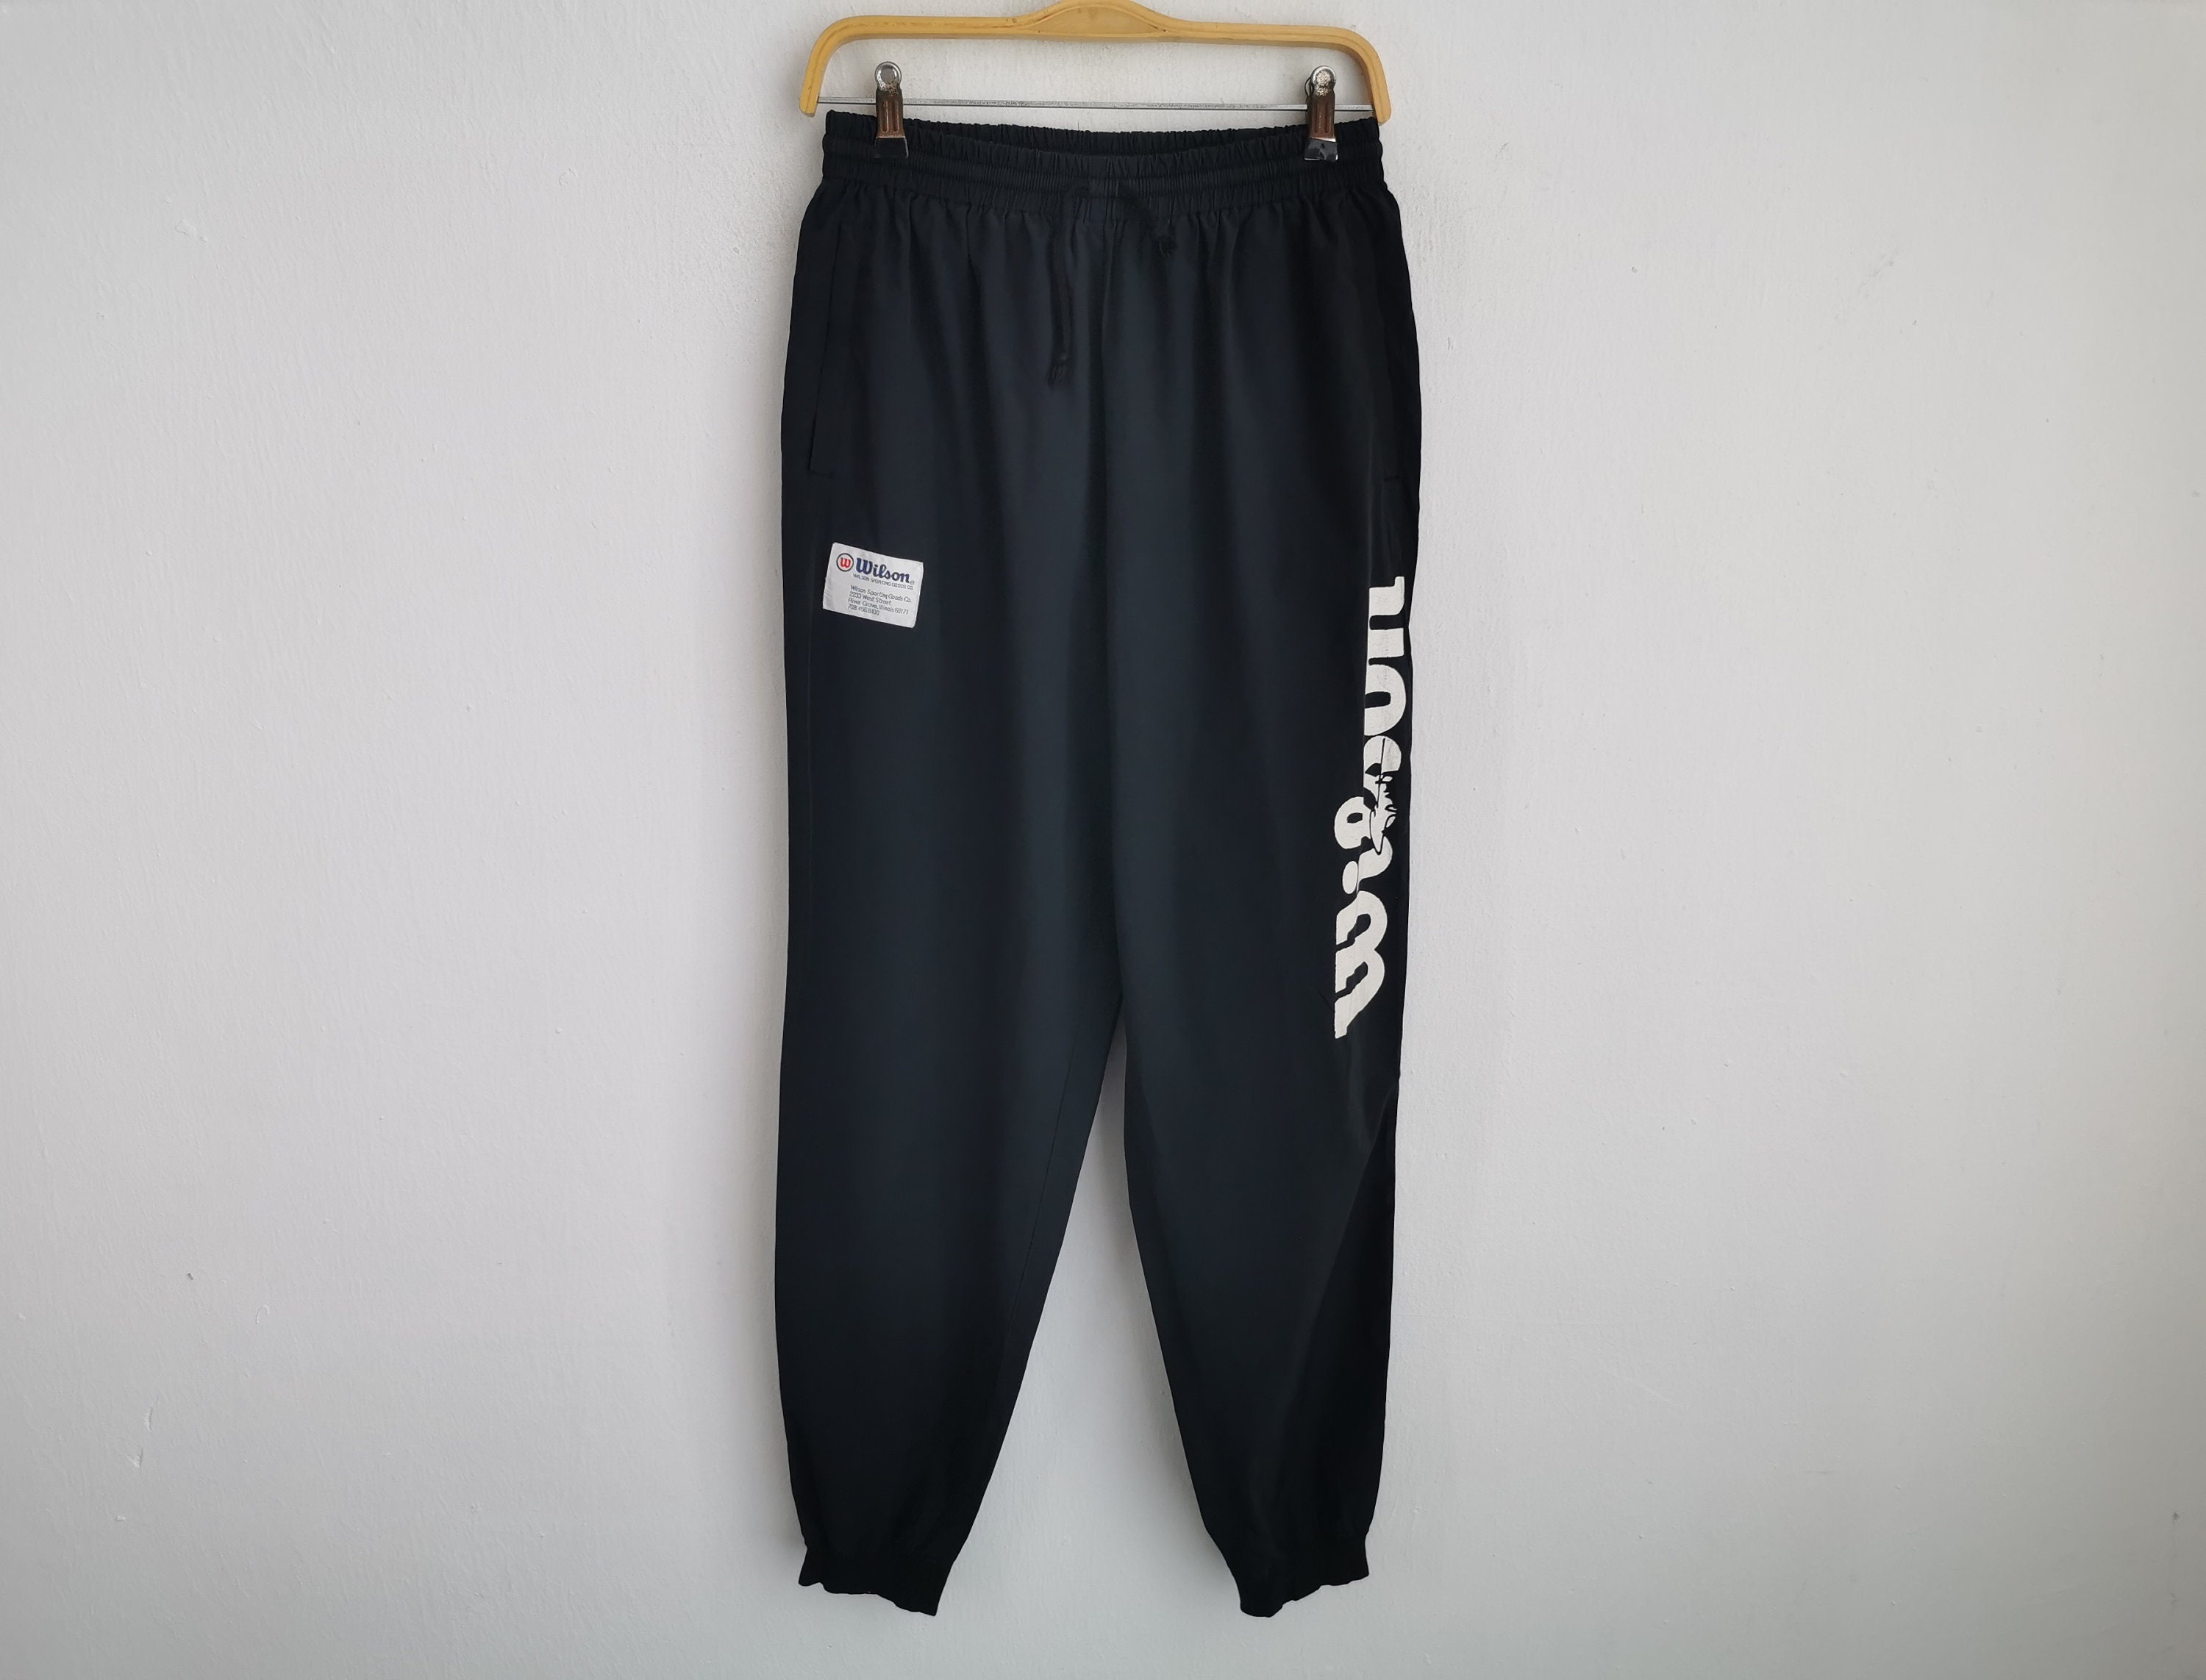 Wilson Track Pants Black with White Trim Size XL